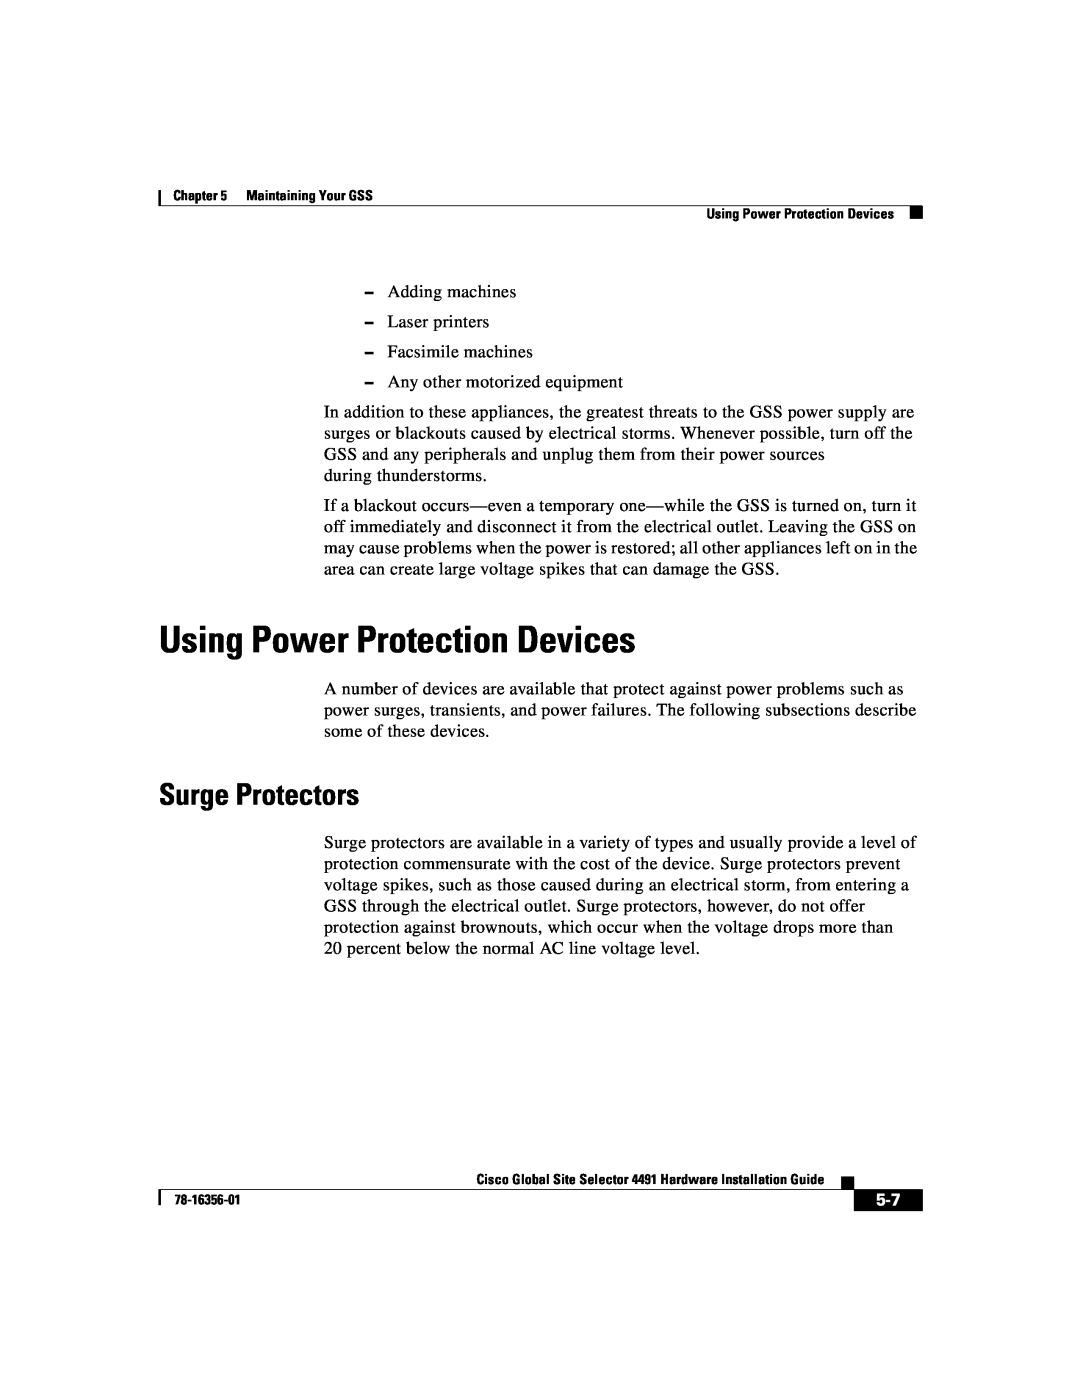 Cisco Systems 78-16356-01 manual Using Power Protection Devices, Surge Protectors 